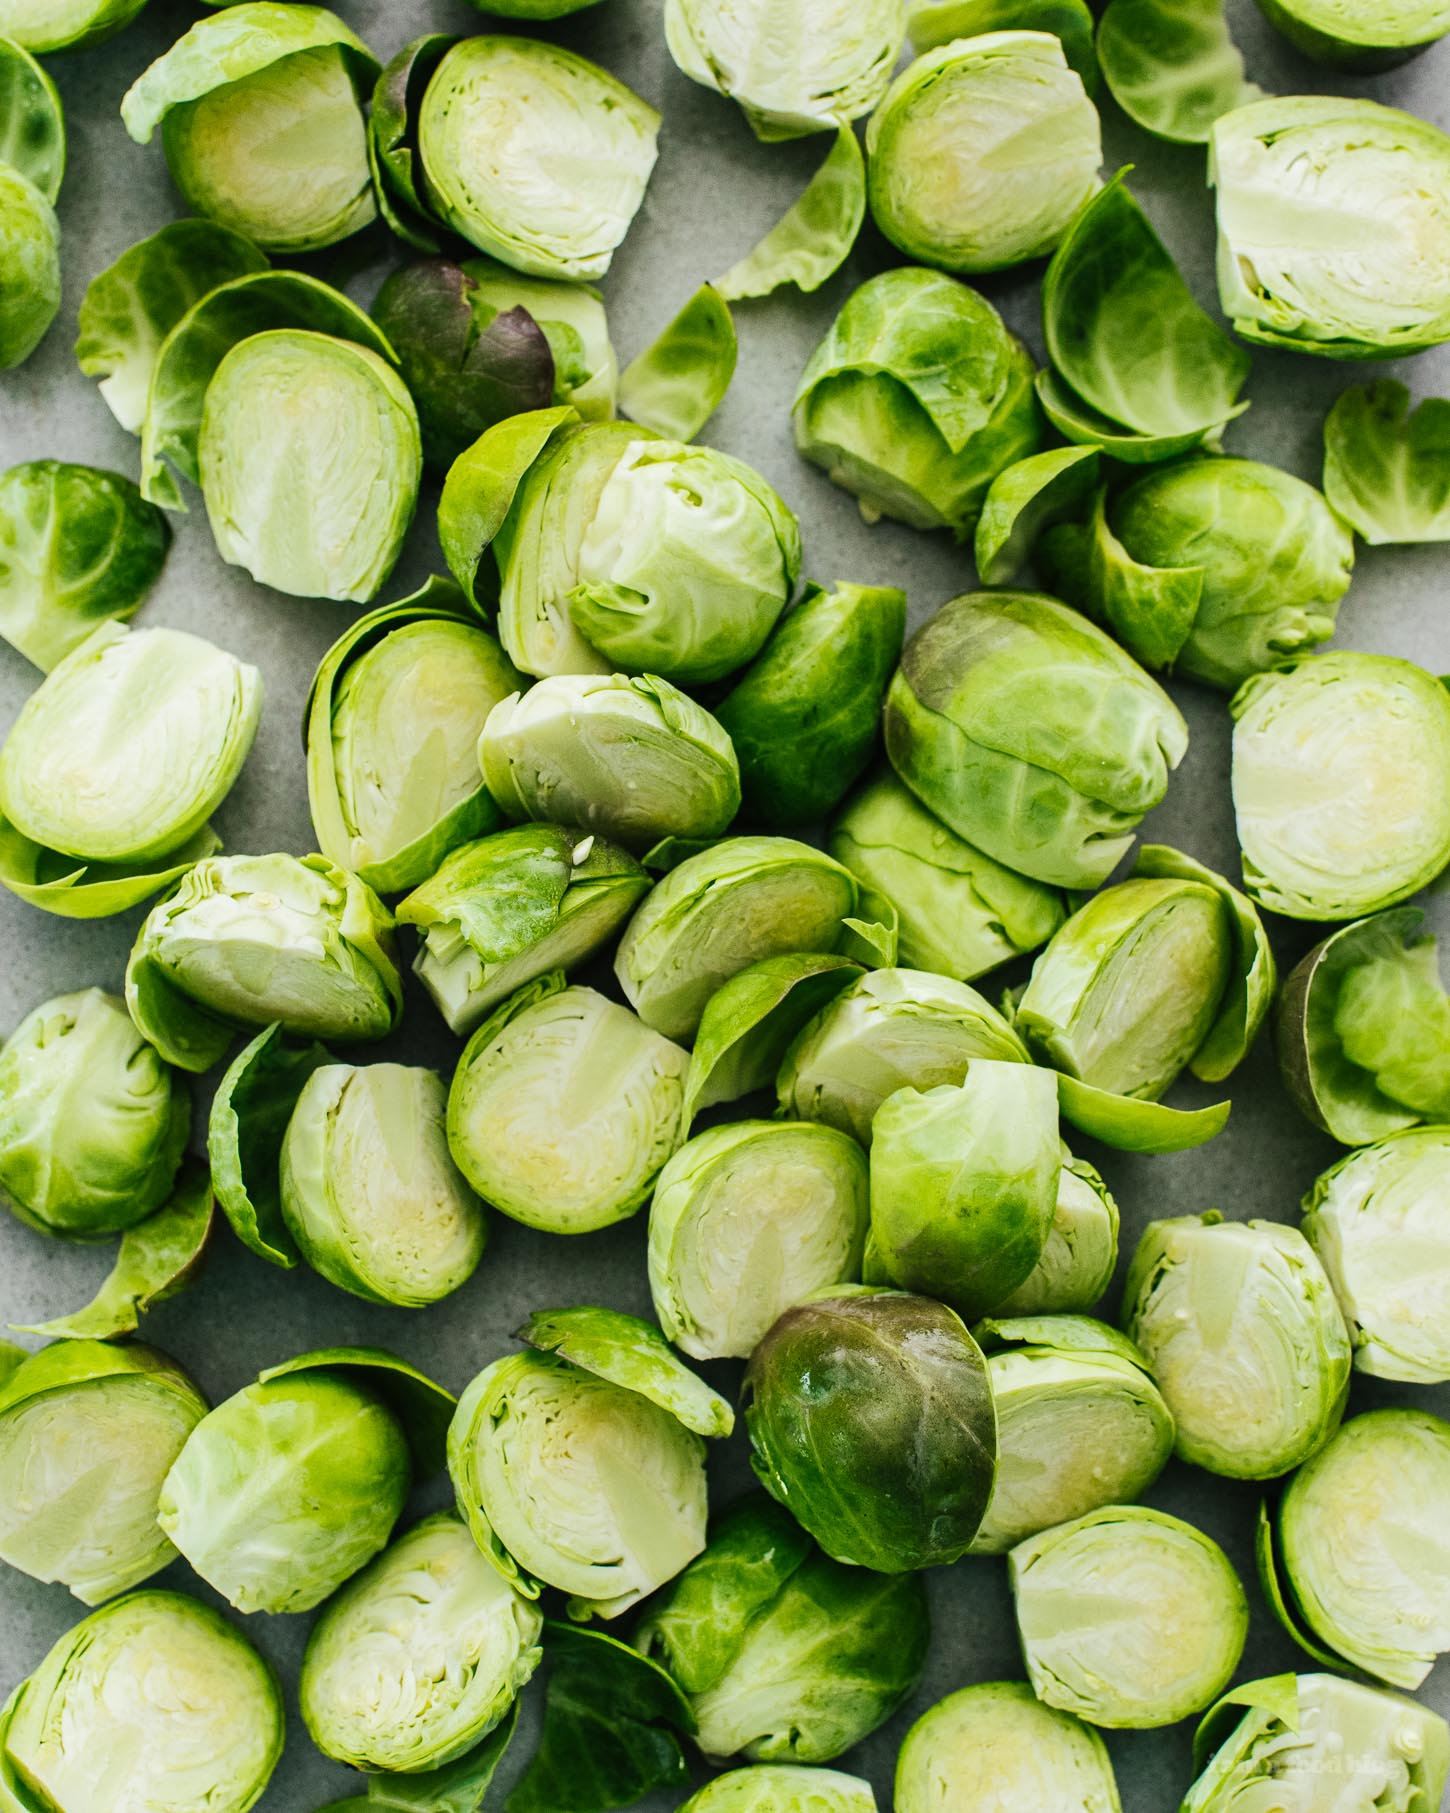 Super Tender Instant Pot Garlic Butter Brussels Sprouts Recipe | www.iamafoodblog.com